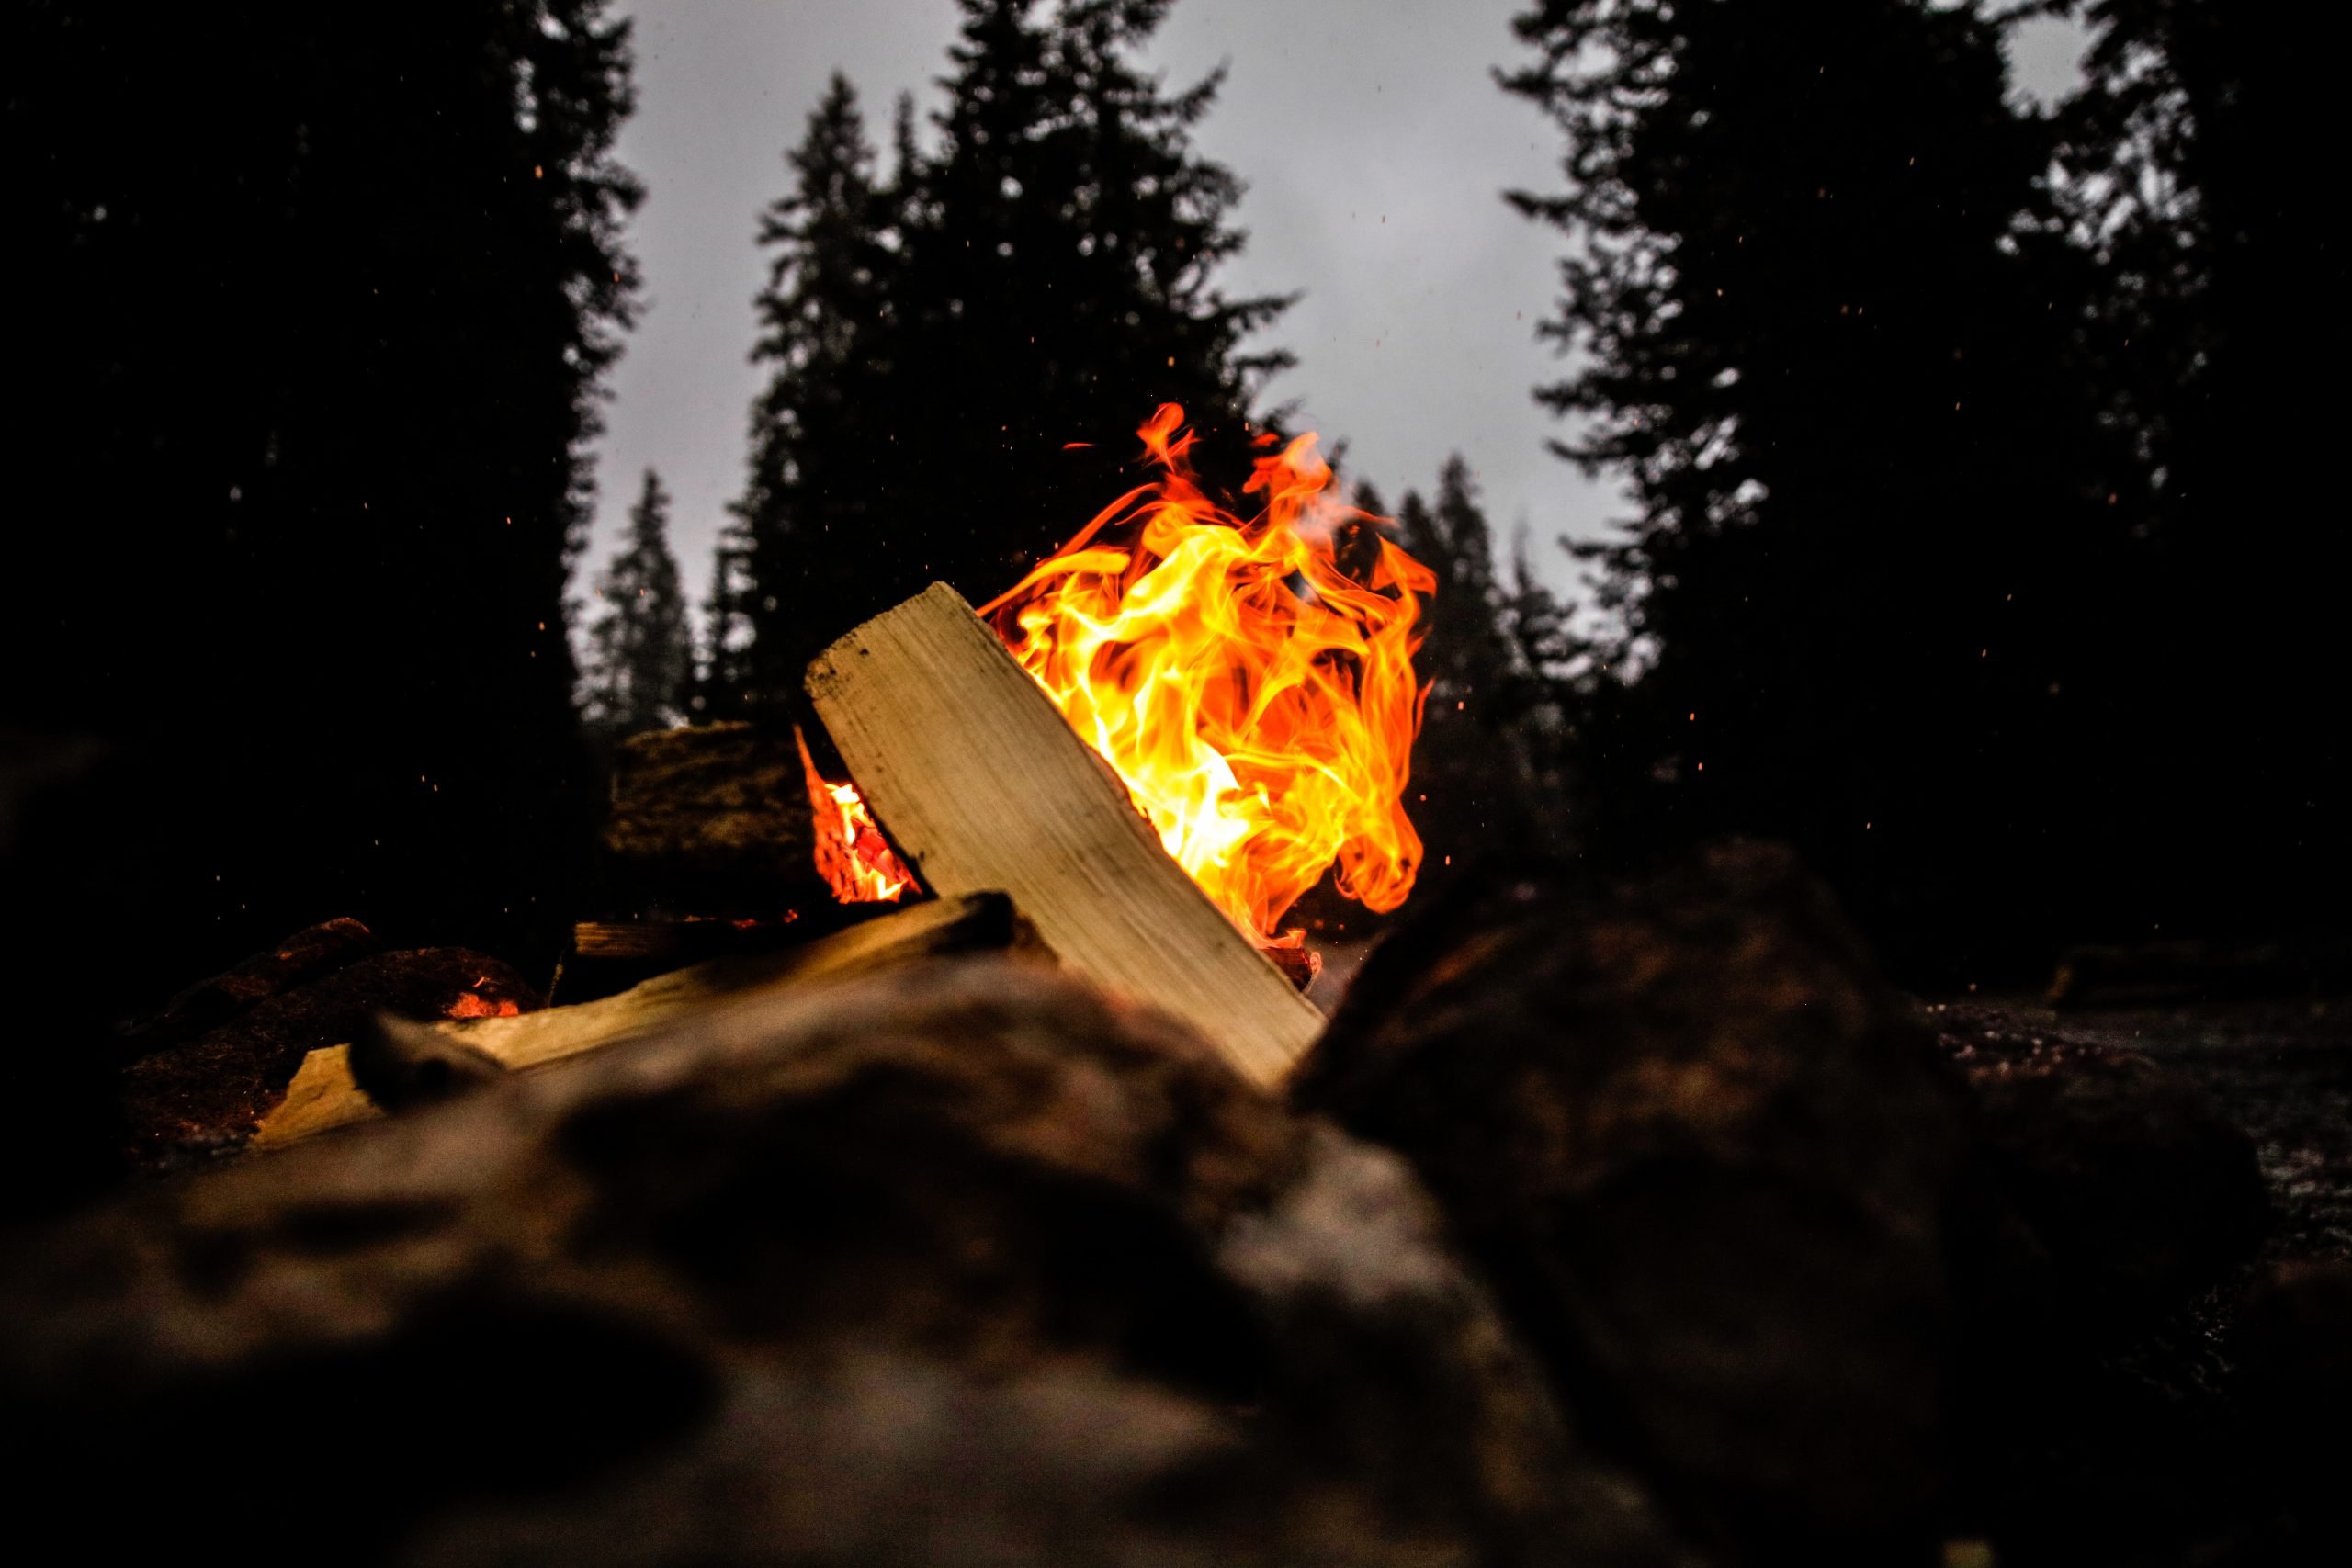 Burning campfire in the woods